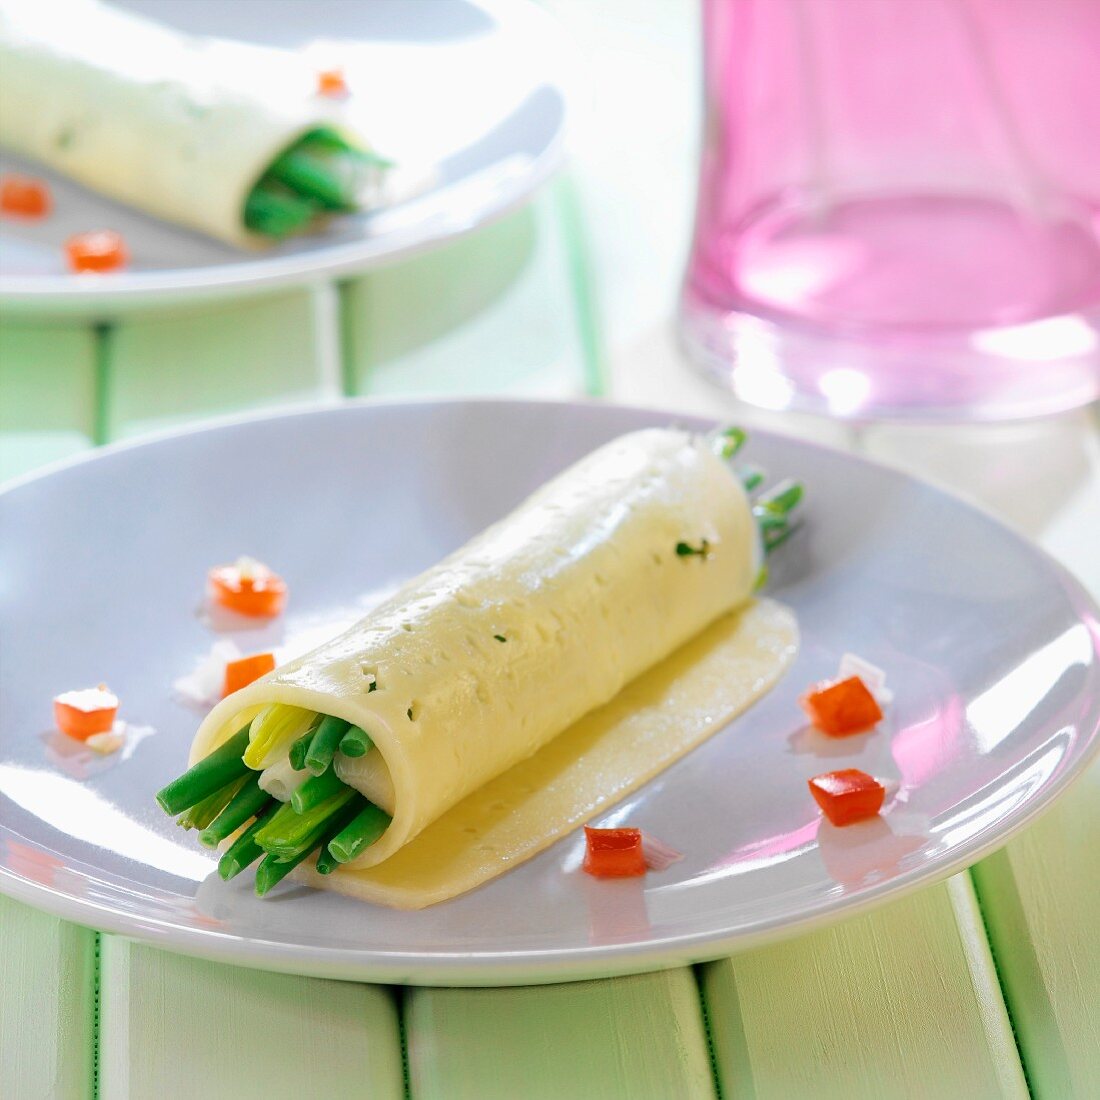 Cheese cannelloni filled with green beans